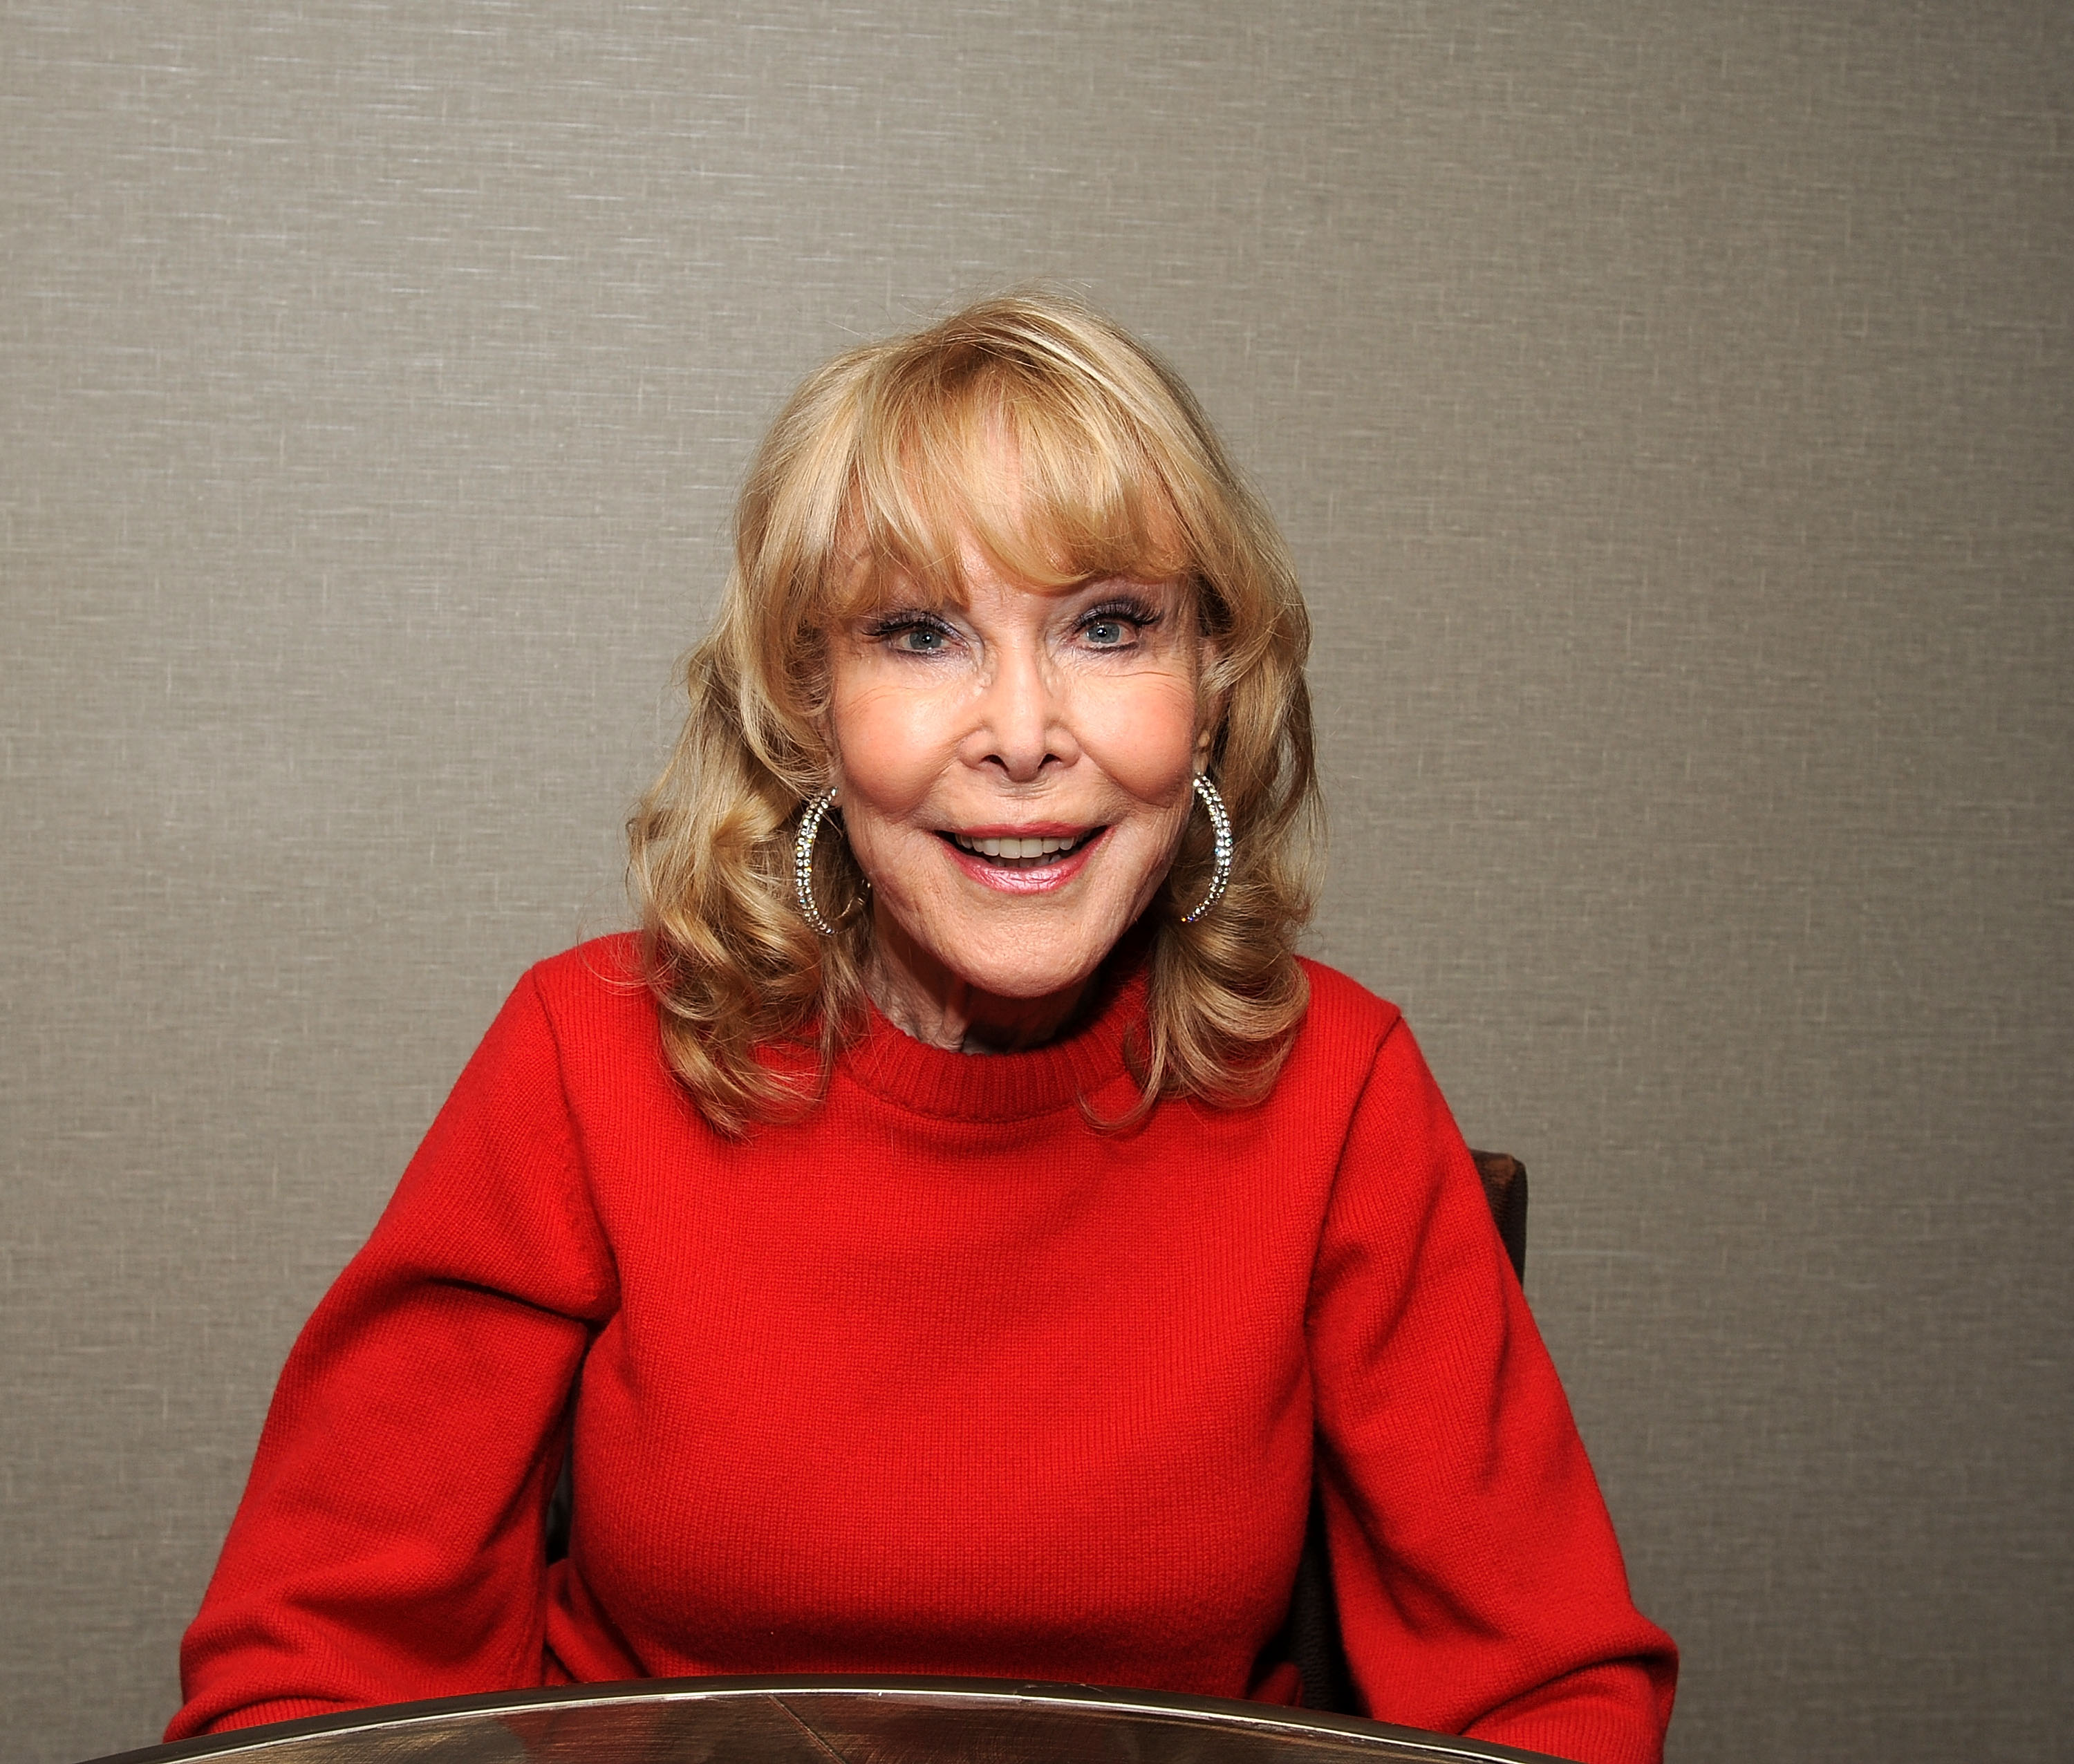 Barbara Eden attends the Chiller Theatre Expo Fall 2018 in Parsippany, New Jersey on October 26, 2018 | Source: Getty Images